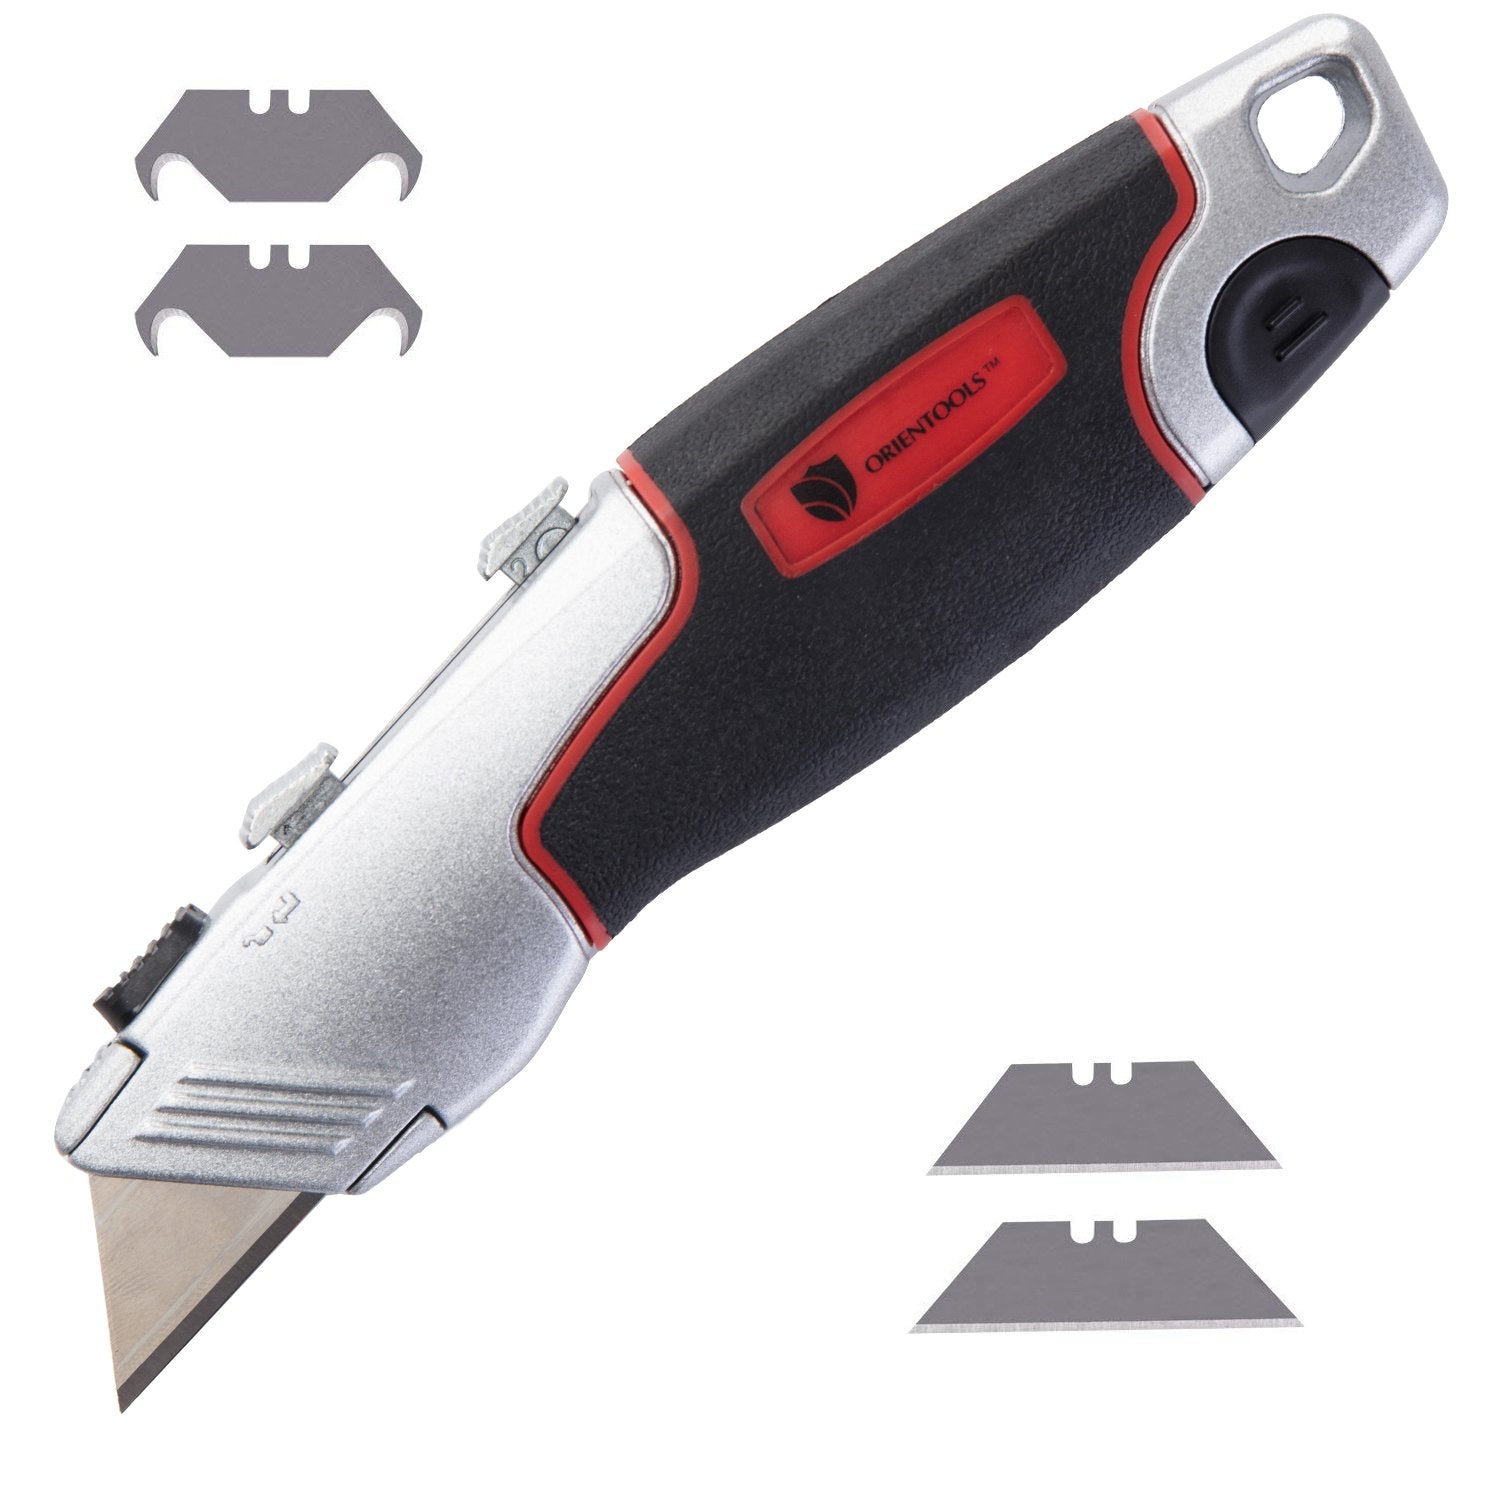 ORIENTOOLS Utility Knife Box Cutter Heavy Duty, Multifunctional Retractable with Hook Blade, Carpet Cutting Blades